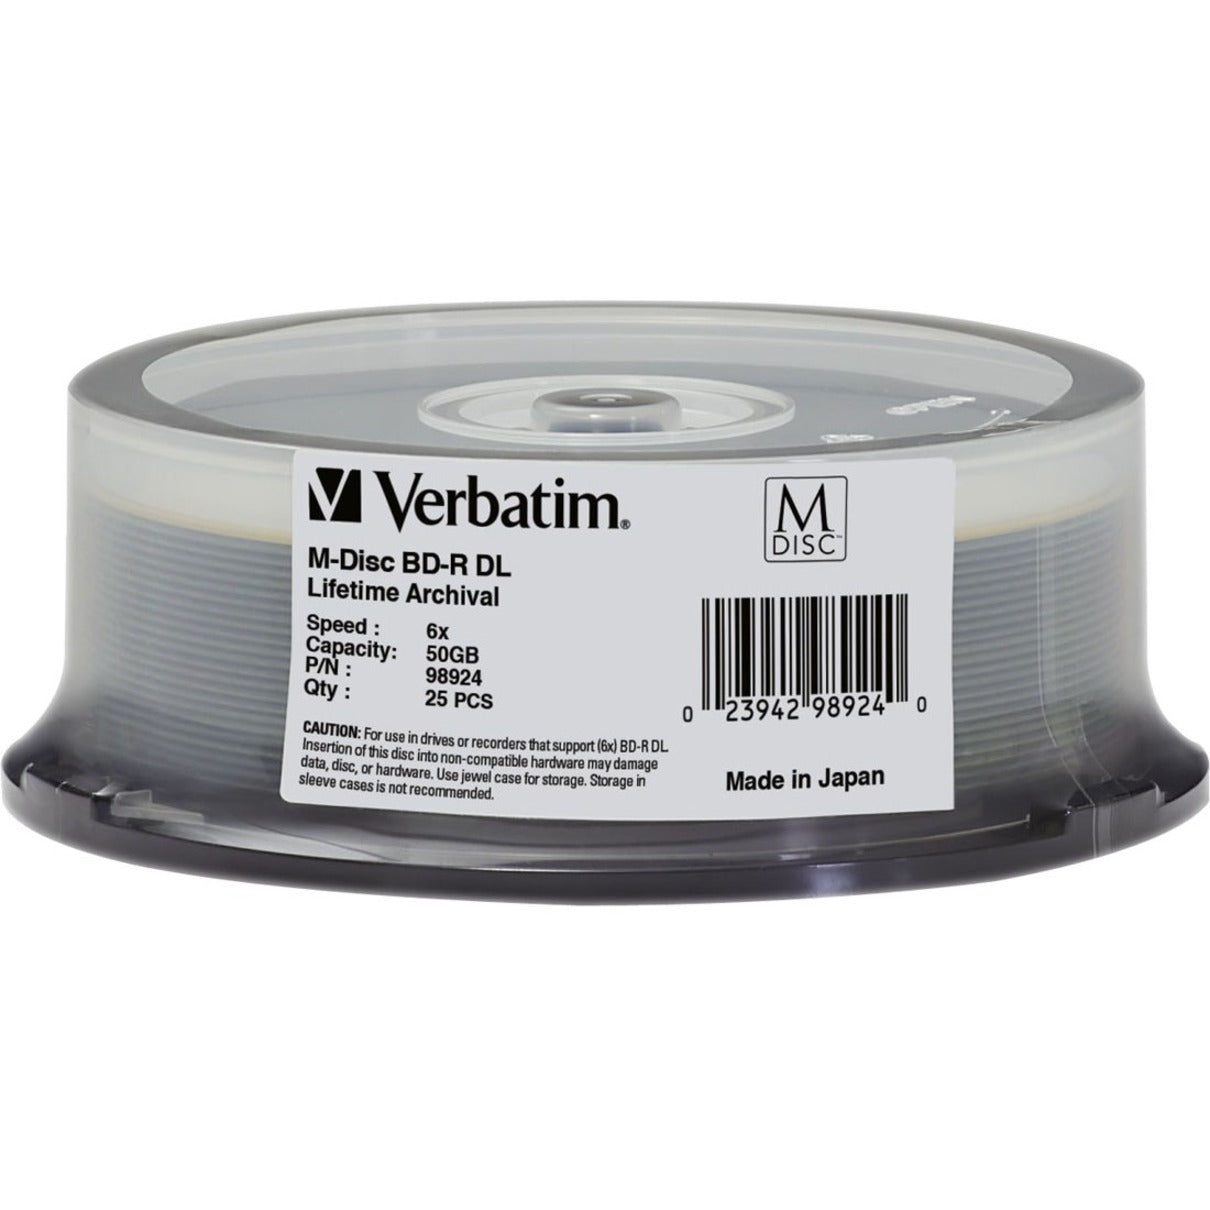 Verbatim 98924 M-Disc BD-R DL 50GB 8X with Branded Surface - 25pk Spindle, 10 Year Warranty, Made in Japan